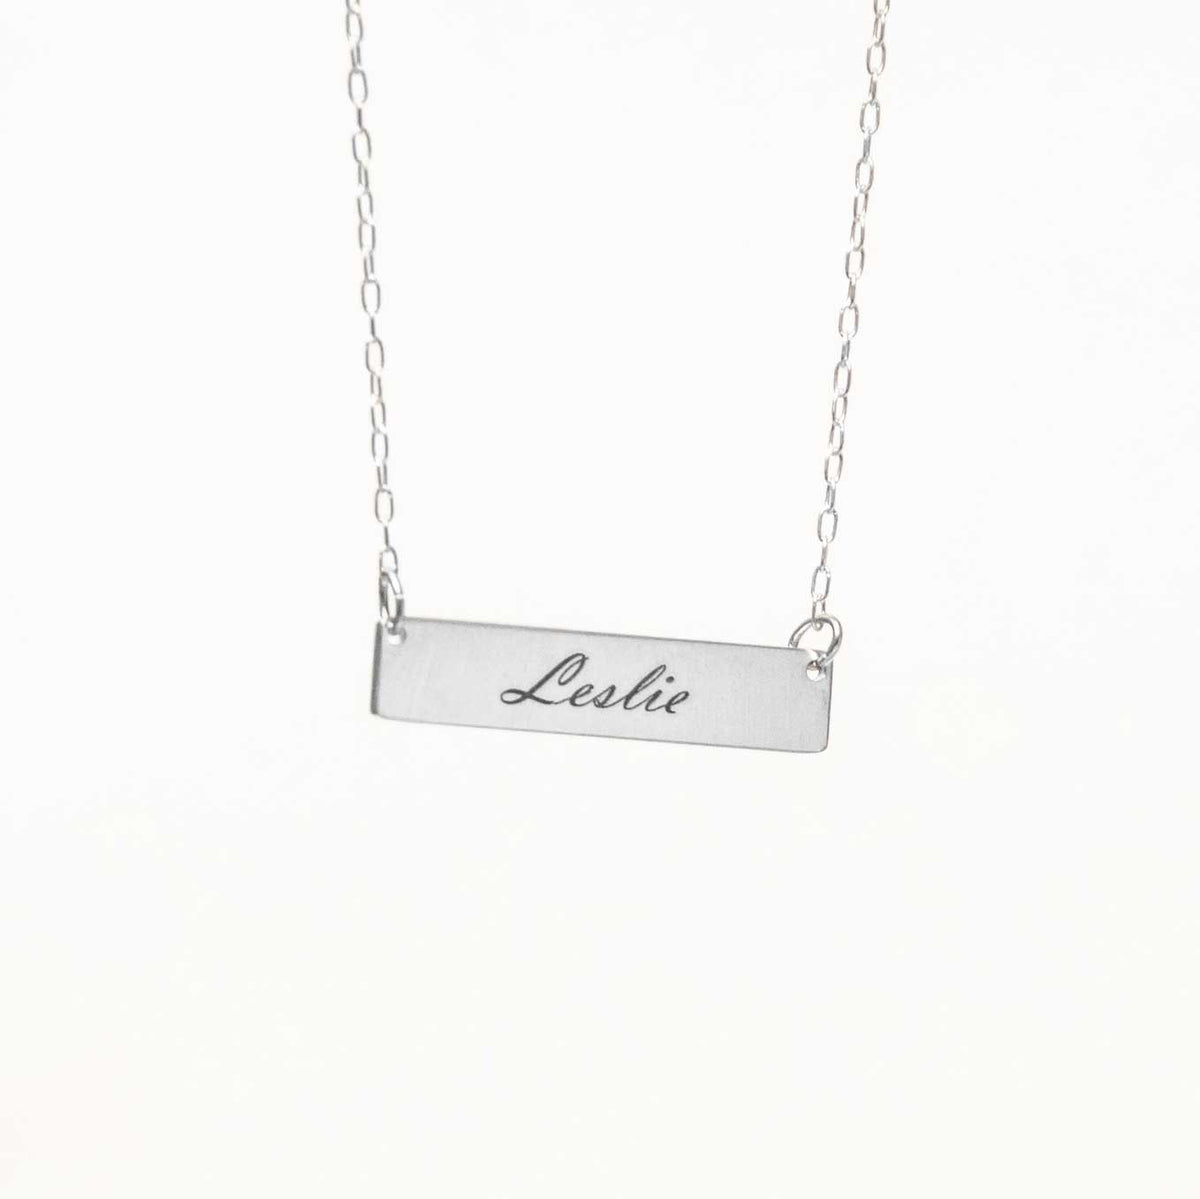 Rectangle necklace hanging from above with a solid white background. 